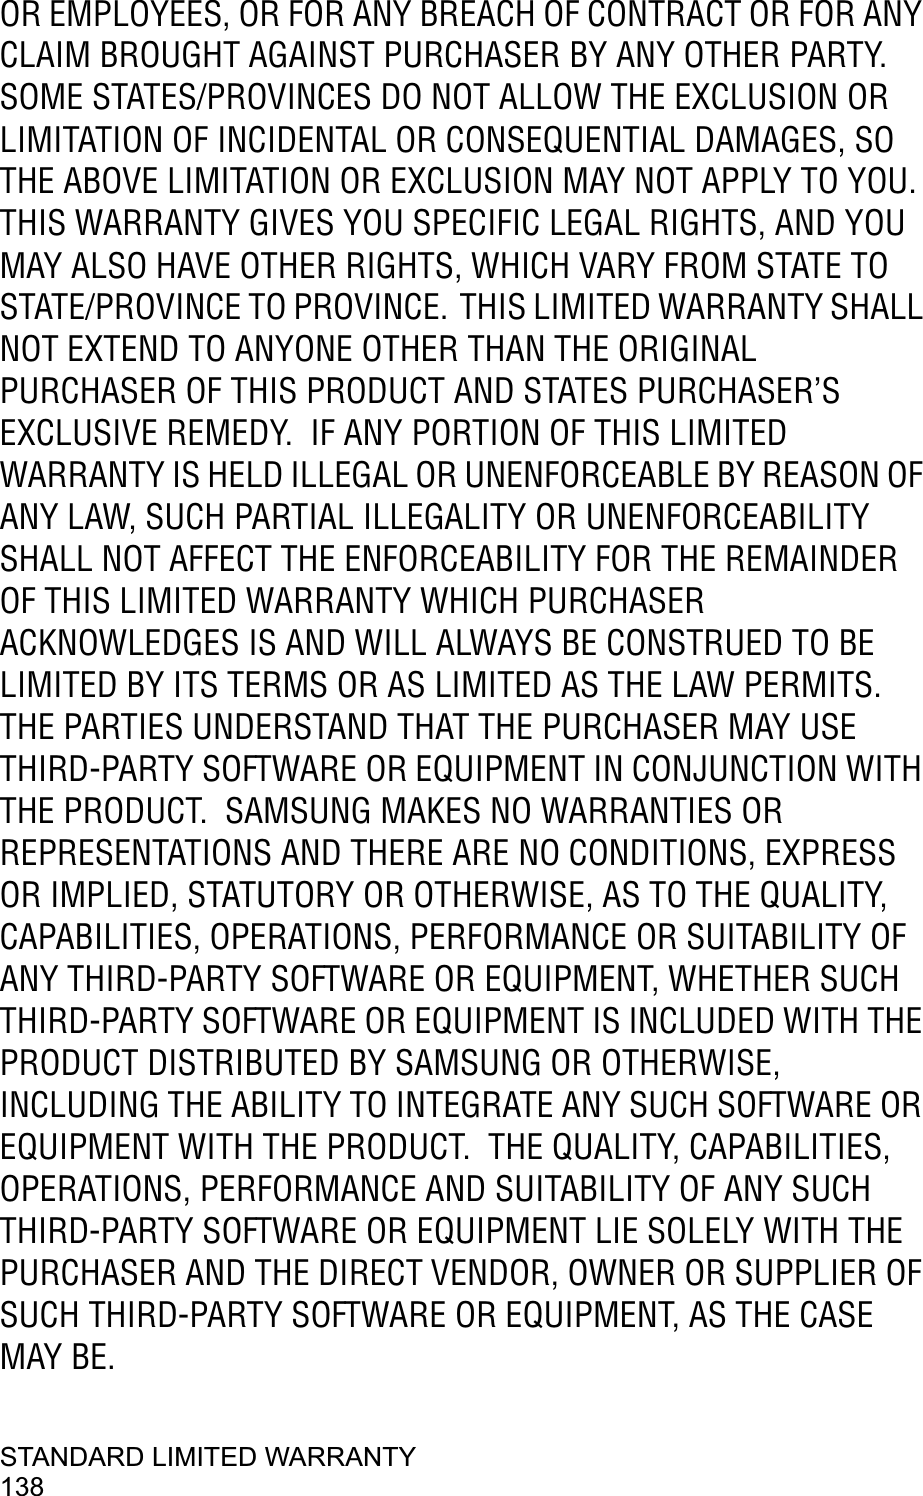 STANDARD LIMITED WARRANTY138OR EMPLOYEES, OR FOR ANY BREACH OF CONTRACT OR FOR ANY CLAIM BROUGHT AGAINST PURCHASER BY ANY OTHER PARTY.  SOME STATES/PROVINCES DO NOT ALLOW THE EXCLUSION OR LIMITATION OF INCIDENTAL OR CONSEQUENTIAL DAMAGES, SO THE ABOVE LIMITATION OR EXCLUSION MAY NOT APPLY TO YOU.THIS WARRANTY GIVES YOU SPECIFIC LEGAL RIGHTS, AND YOU MAY ALSO HAVE OTHER RIGHTS, WHICH VARY FROM STATE TO STATE/PROVINCE TO PROVINCE. THIS LIMITED WARRANTY SHALL NOT EXTEND TO ANYONE OTHER THAN THE ORIGINAL PURCHASER OF THIS PRODUCT AND STATES PURCHASER’S EXCLUSIVE REMEDY.  IF ANY PORTION OF THIS LIMITED WARRANTY IS HELD ILLEGAL OR UNENFORCEABLE BY REASON OF ANY LAW, SUCH PARTIAL ILLEGALITY OR UNENFORCEABILITYSHALL NOT AFFECT THE ENFORCEABILITY FOR THE REMAINDER OF THIS LIMITED WARRANTY WHICH PURCHASER ACKNOWLEDGES IS AND WILL ALWAYS BE CONSTRUED TO BE LIMITED BY ITS TERMS OR AS LIMITED AS THE LAW PERMITS.THE PARTIES UNDERSTAND THAT THE PURCHASER MAY USE THIRD-PARTY SOFTWARE OR EQUIPMENT IN CONJUNCTION WITH THE PRODUCT.  SAMSUNG MAKES NO WARRANTIES OR REPRESENTATIONS AND THERE ARE NO CONDITIONS, EXPRESS OR IMPLIED, STATUTORY OR OTHERWISE, AS TO THE QUALITY, CAPABILITIES, OPERATIONS, PERFORMANCE OR SUITABILITY OF ANY THIRD-PARTY SOFTWARE OR EQUIPMENT, WHETHER SUCH THIRD-PARTY SOFTWARE OR EQUIPMENT IS INCLUDED WITH THE PRODUCT DISTRIBUTED BY SAMSUNG OR OTHERWISE, INCLUDING THE ABILITY TO INTEGRATE ANY SUCH SOFTWARE OR EQUIPMENT WITH THE PRODUCT.  THE QUALITY, CAPABILITIES, OPERATIONS, PERFORMANCE AND SUITABILITY OF ANY SUCH THIRD-PARTY SOFTWARE OR EQUIPMENT LIE SOLELY WITH THE PURCHASER AND THE DIRECT VENDOR, OWNER OR SUPPLIER OF SUCH THIRD-PARTY SOFTWARE OR EQUIPMENT, AS THE CASE MAY BE.